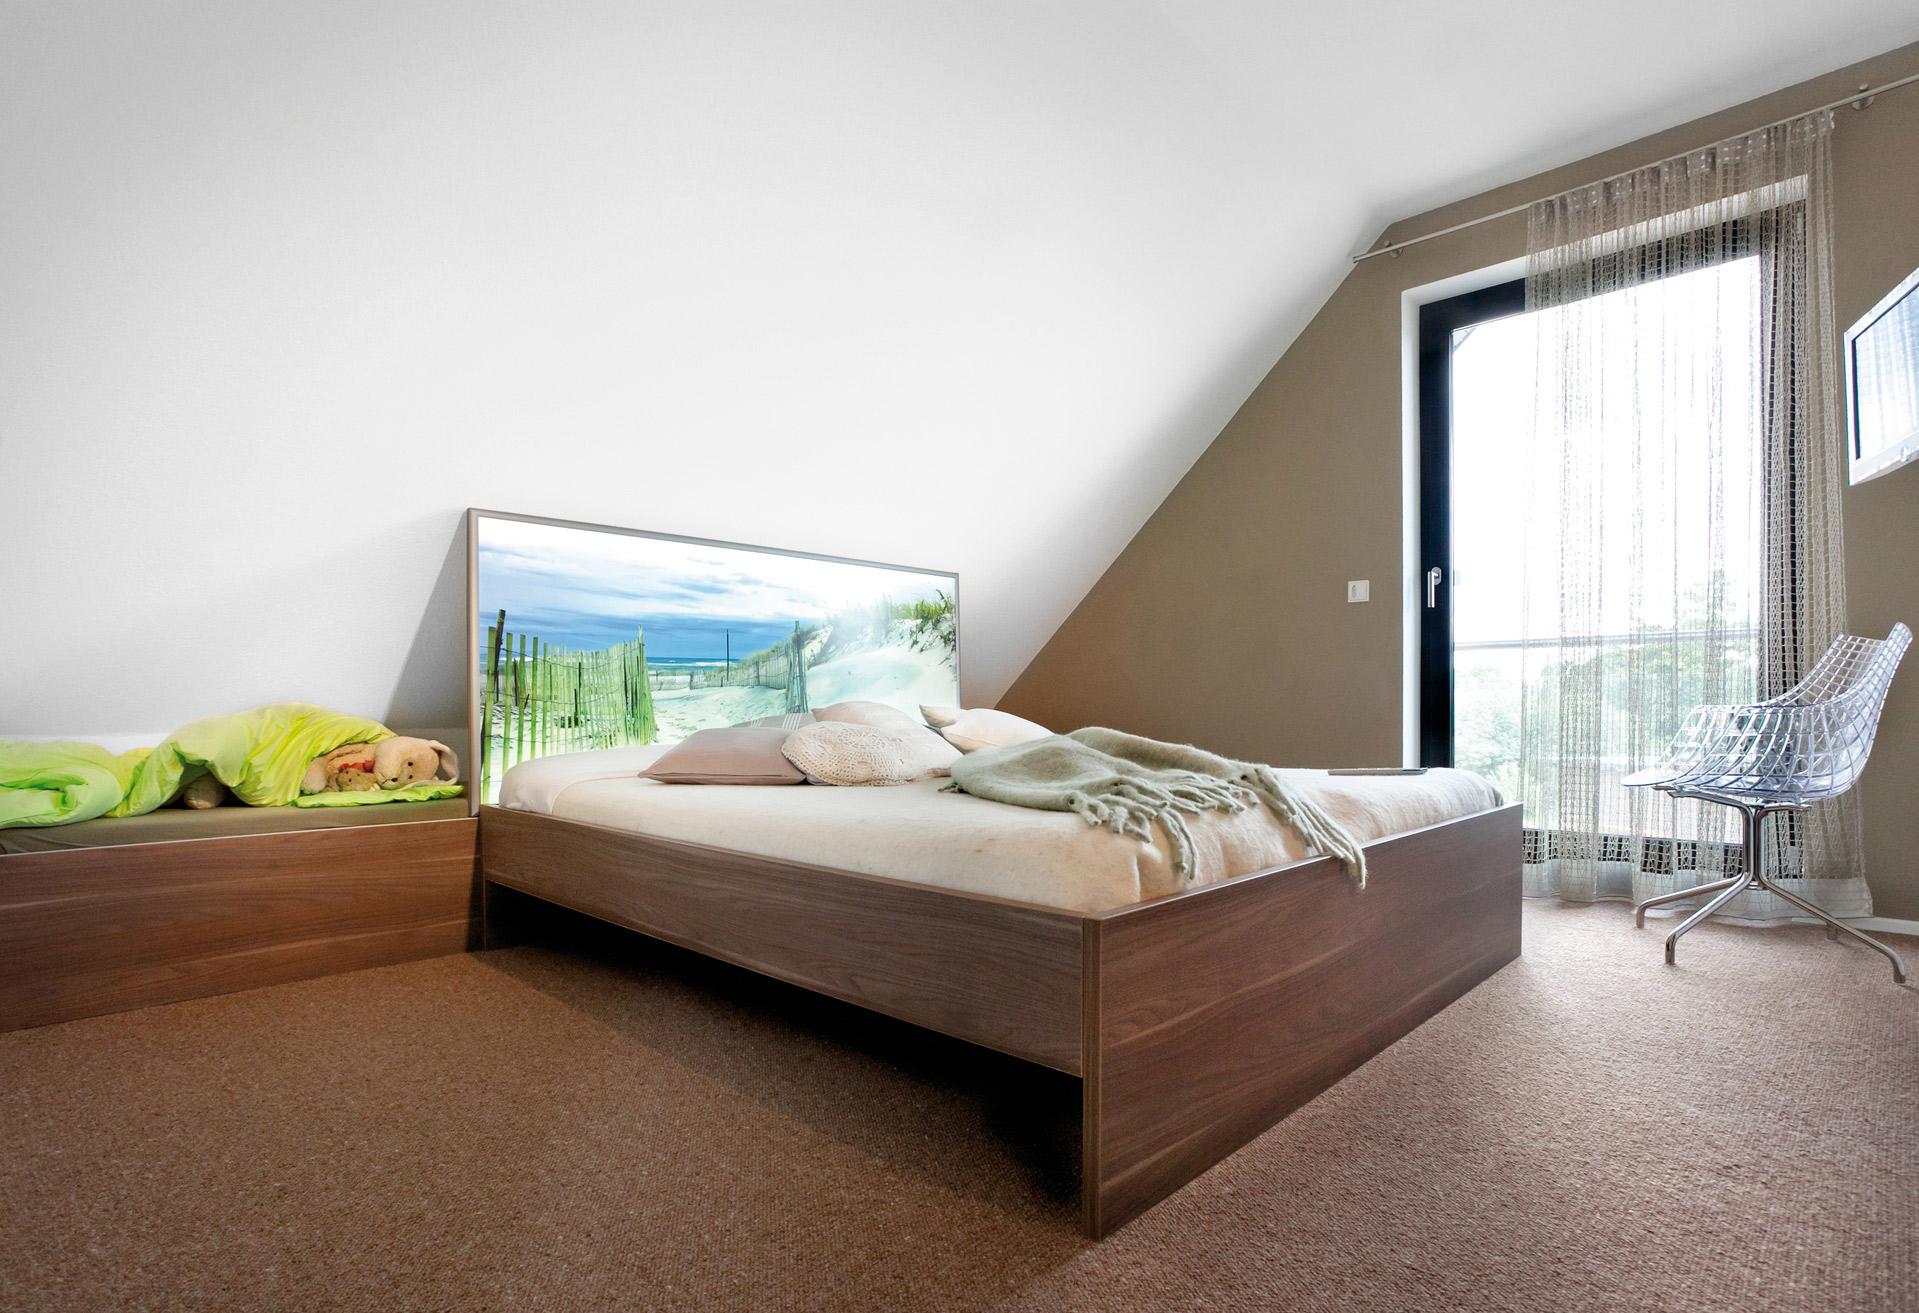 Bedroom with modern bed